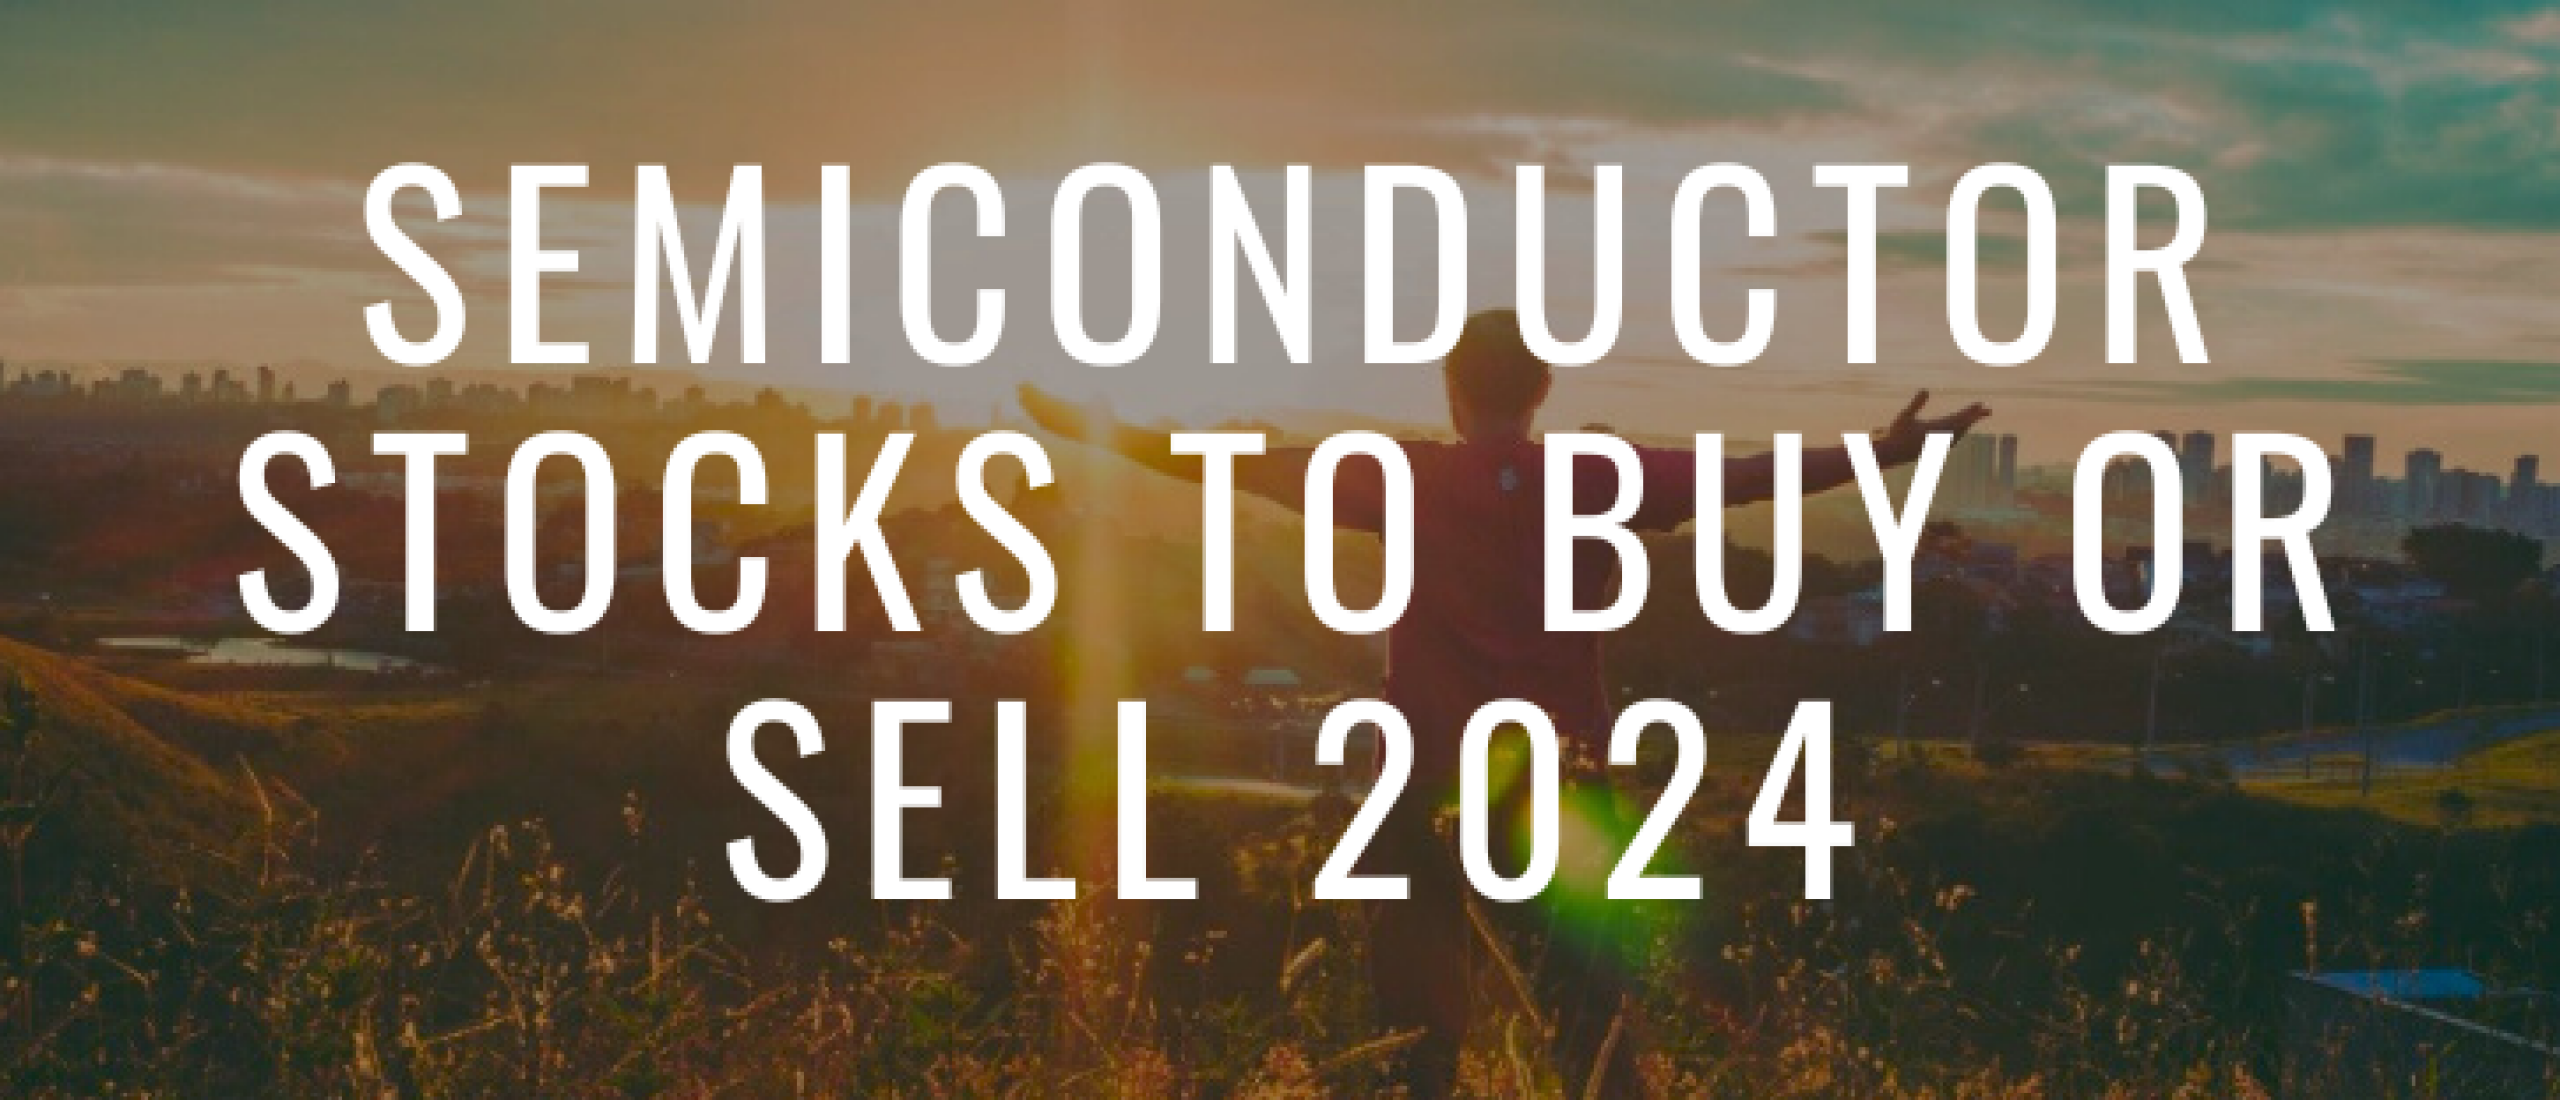 semiconductor-stocks-to-buy-or-sell-2024